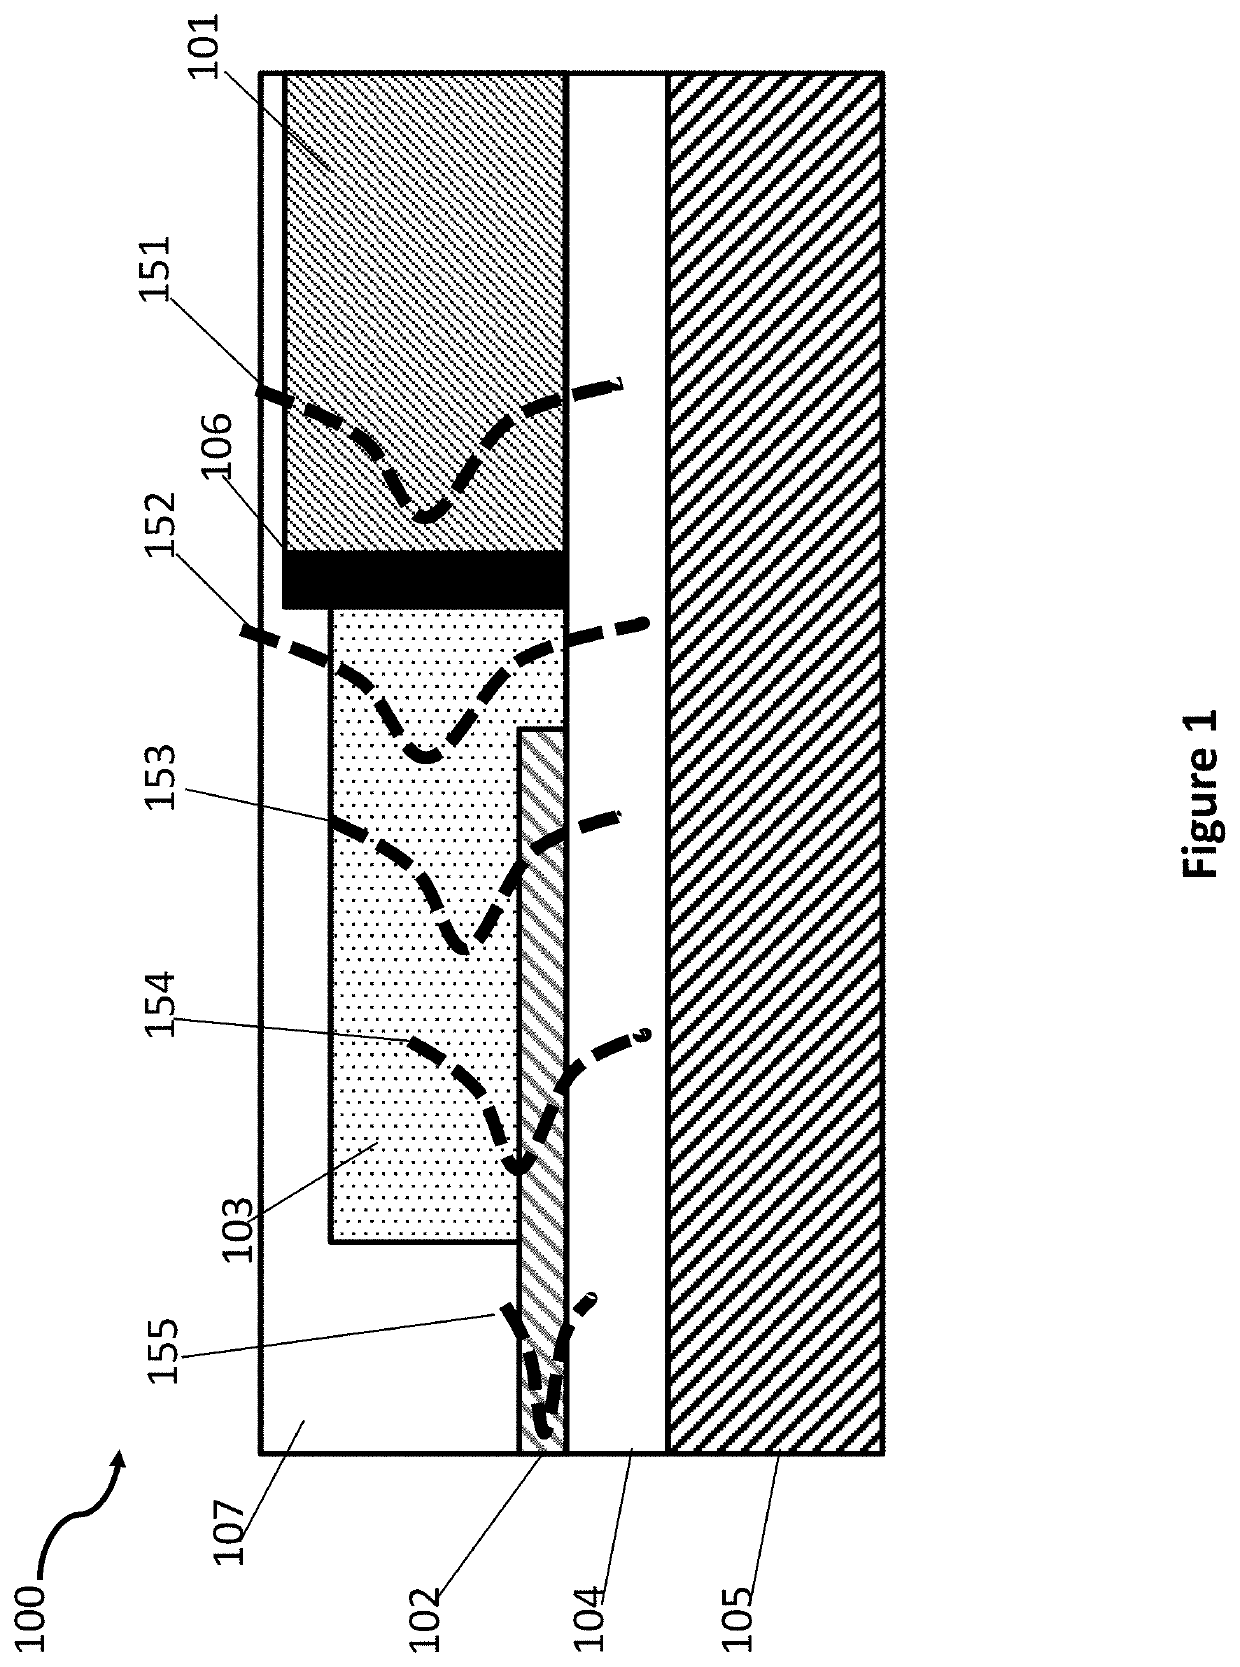 Integrated active devices with improved optical coupling to dielectric waveguides